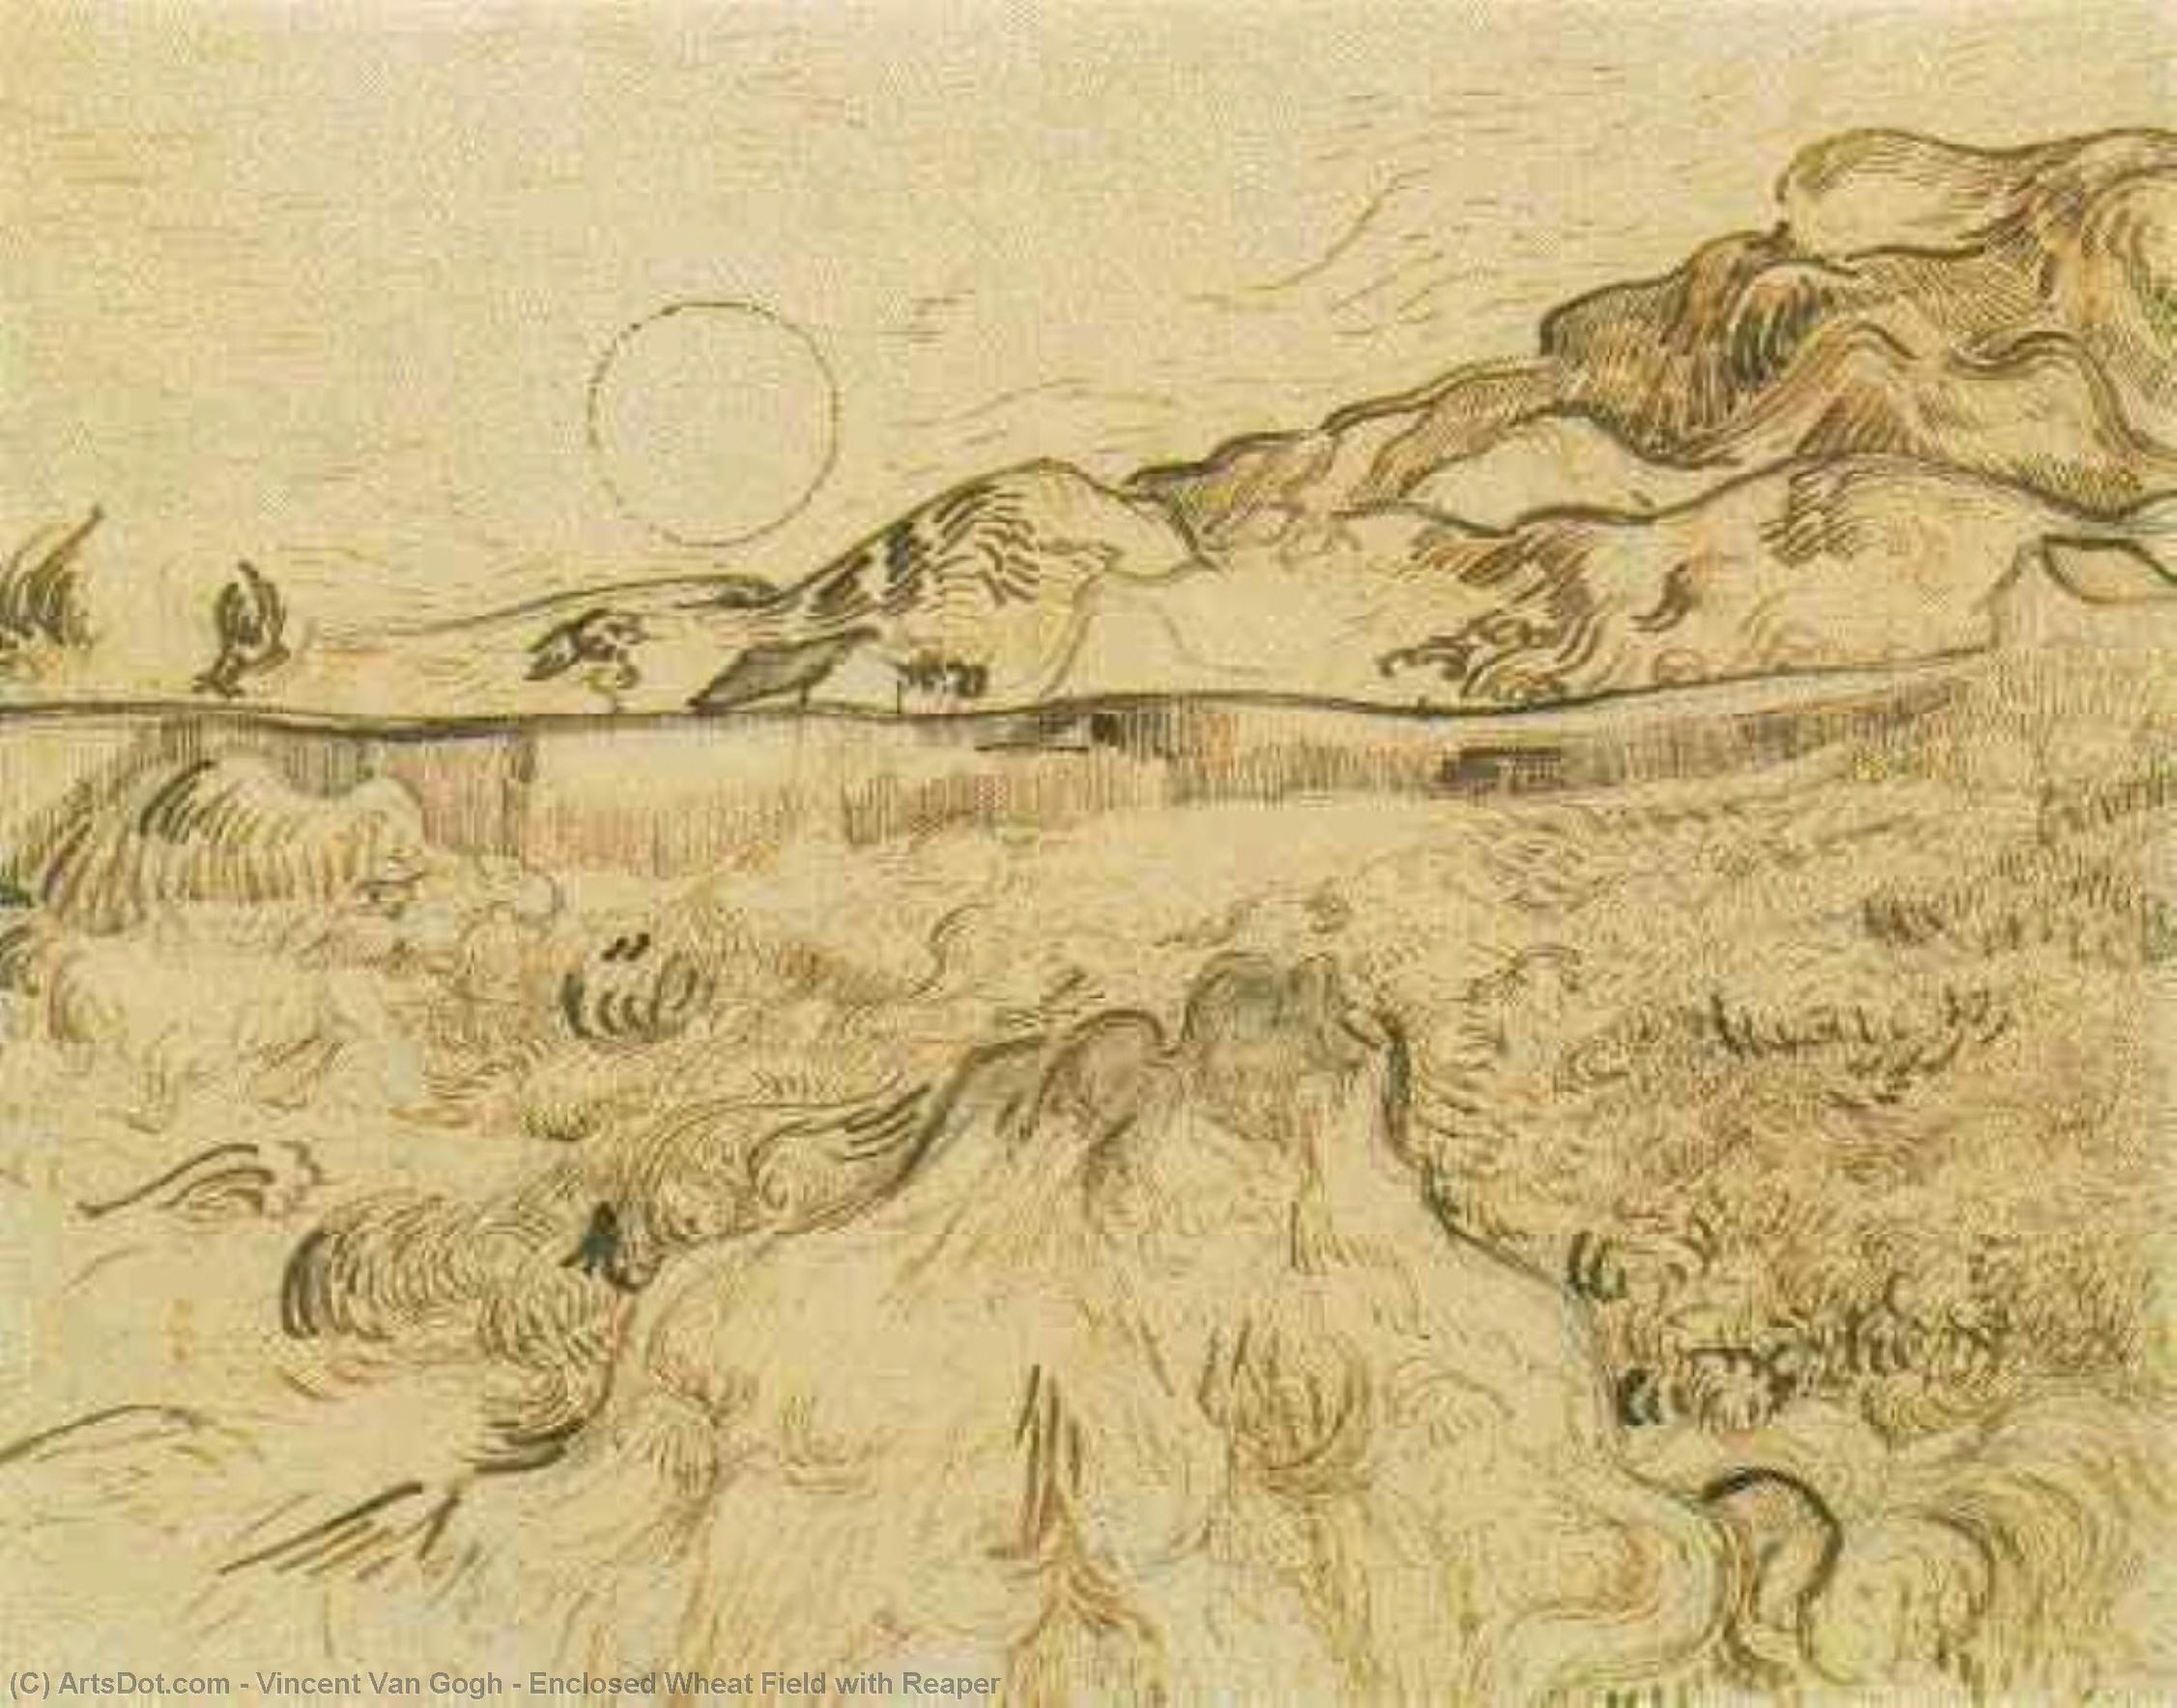 Buy Museum Art Reproductions Enclosed Wheat Field with Reaper, 1889 by Vincent Van Gogh (1853-1890, Netherlands) | ArtsDot.com